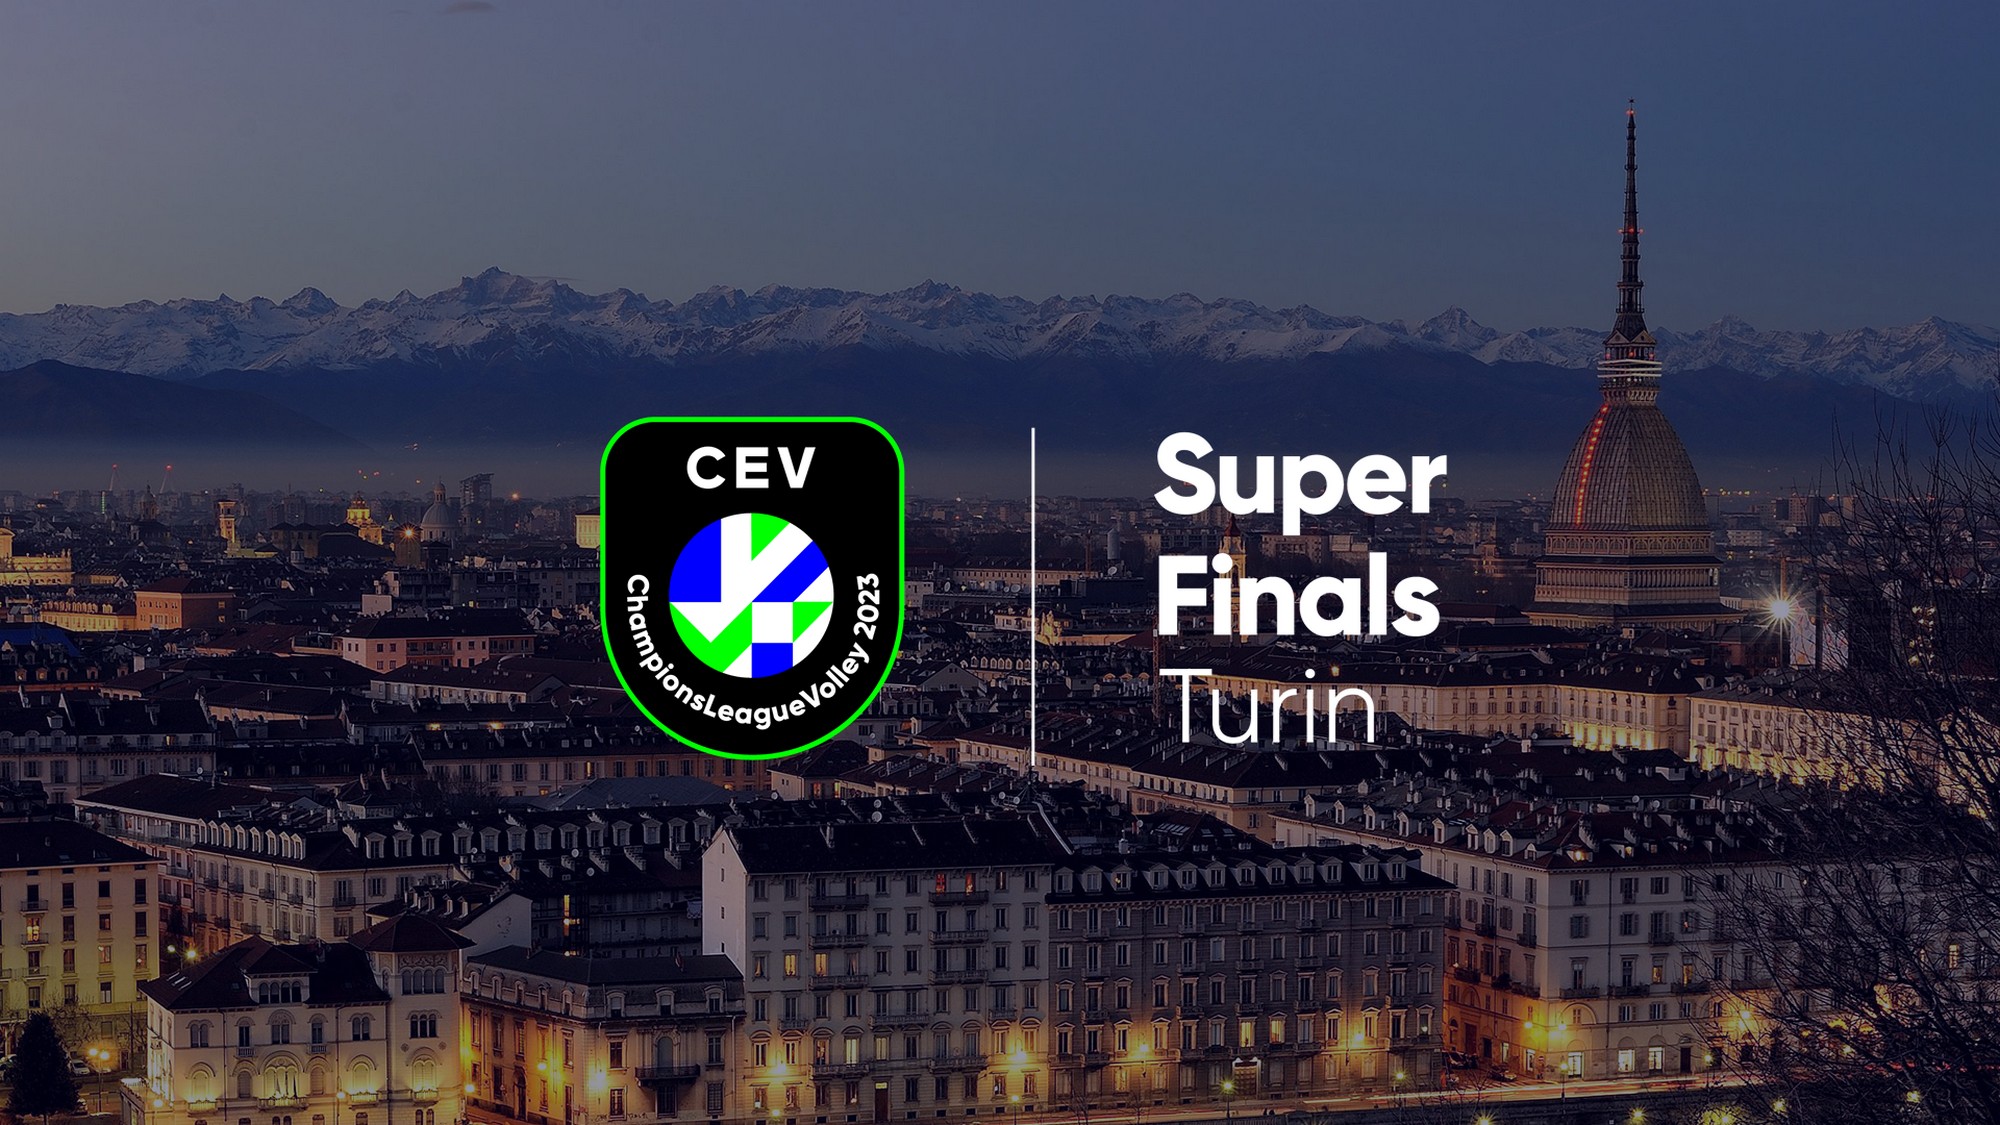 Turin to host Champions League Super Finals 2023!